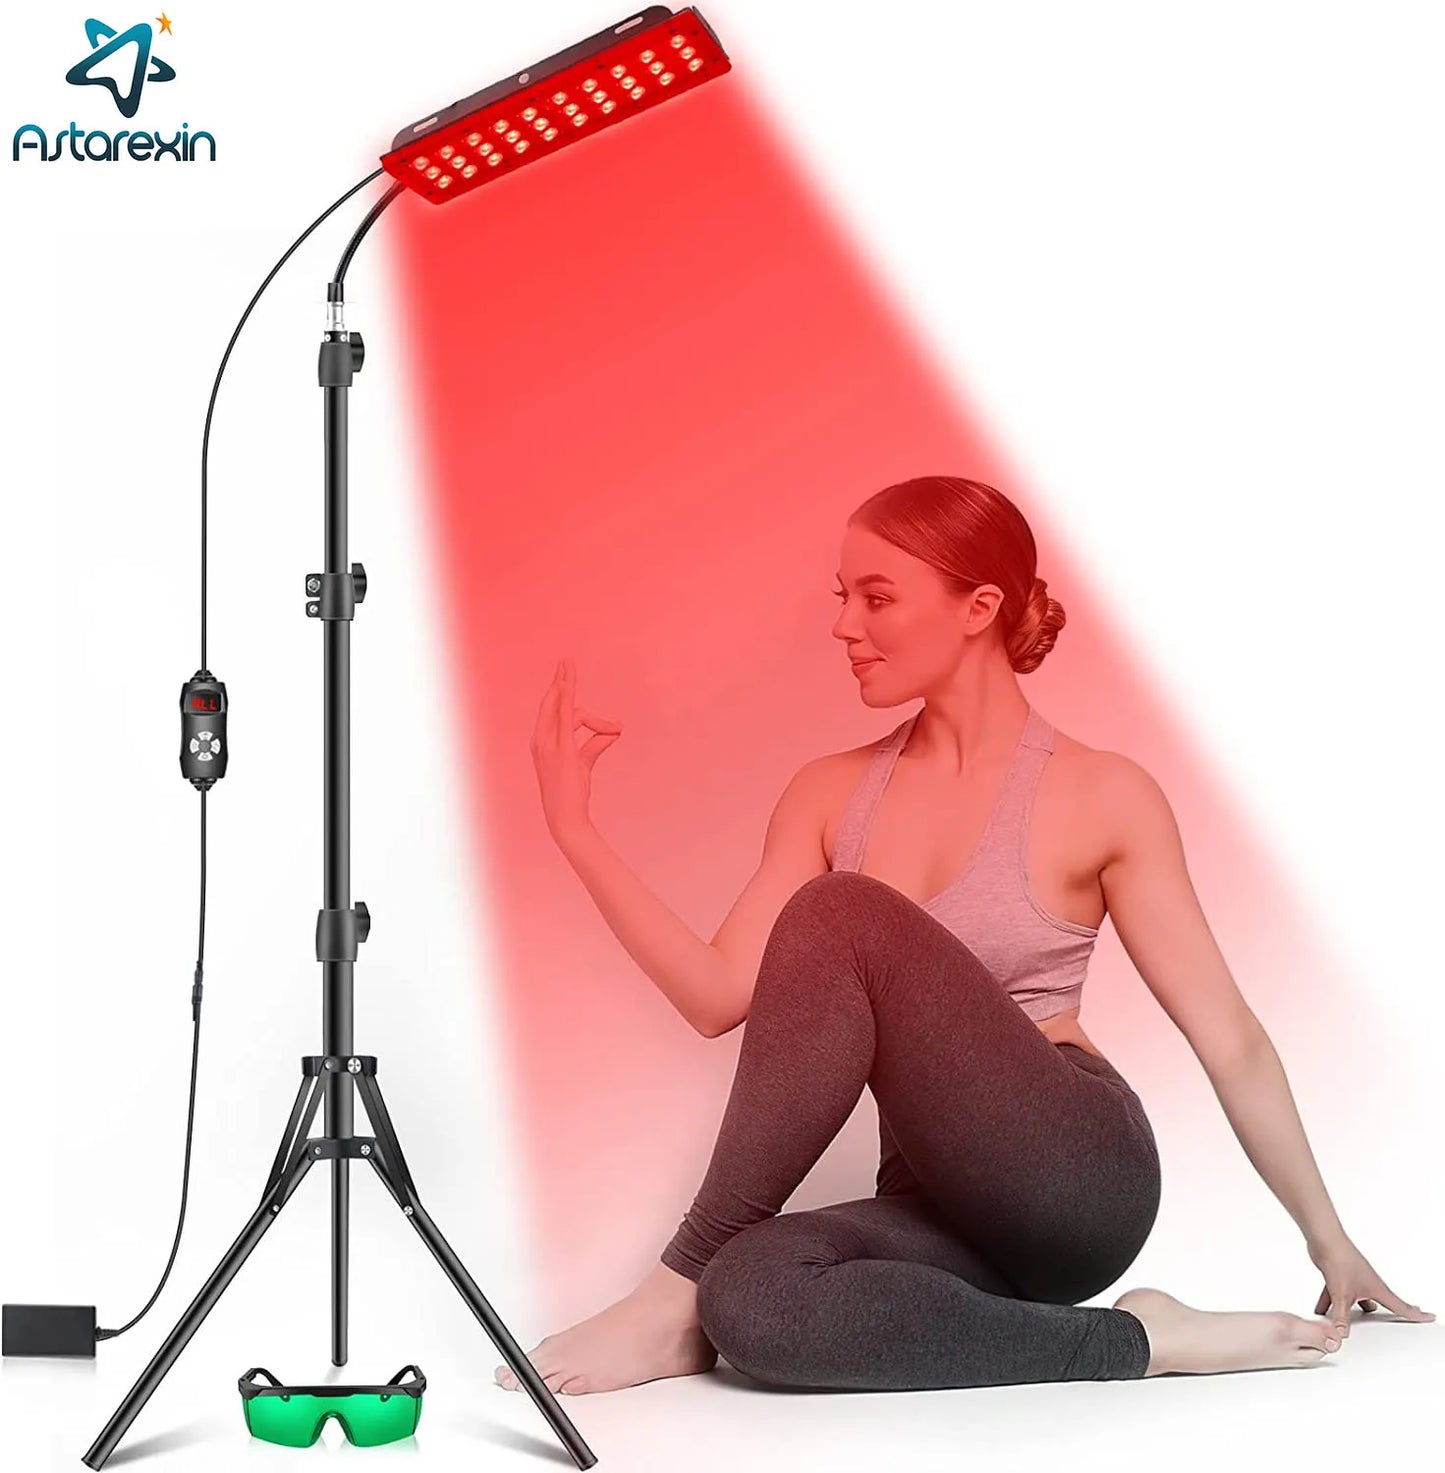 Astarexin Red Light Therapy Face Lamp Infrared Light Therapy Full Body Pain Relief Physiotherapy Skin Care Beauty  660nm 850nm